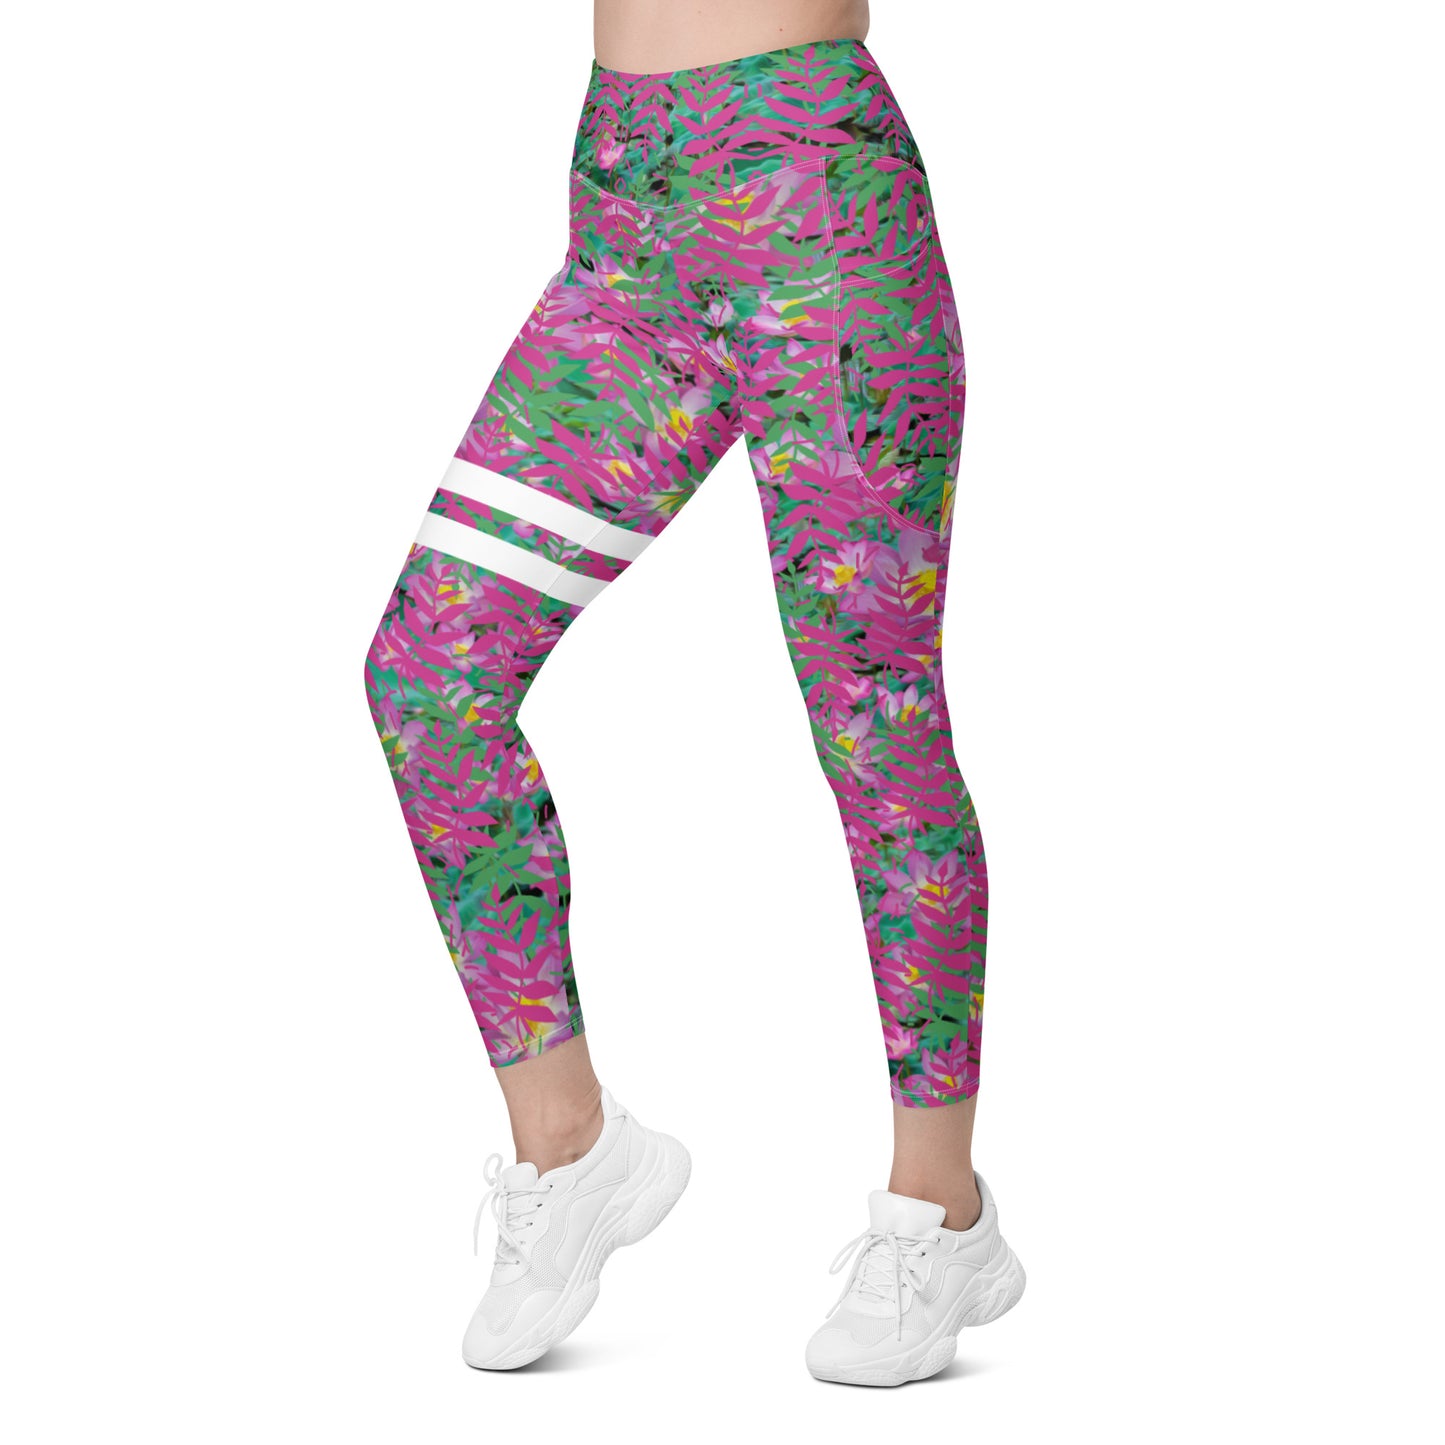 Leggings with pockets - FREE SHIPPING!